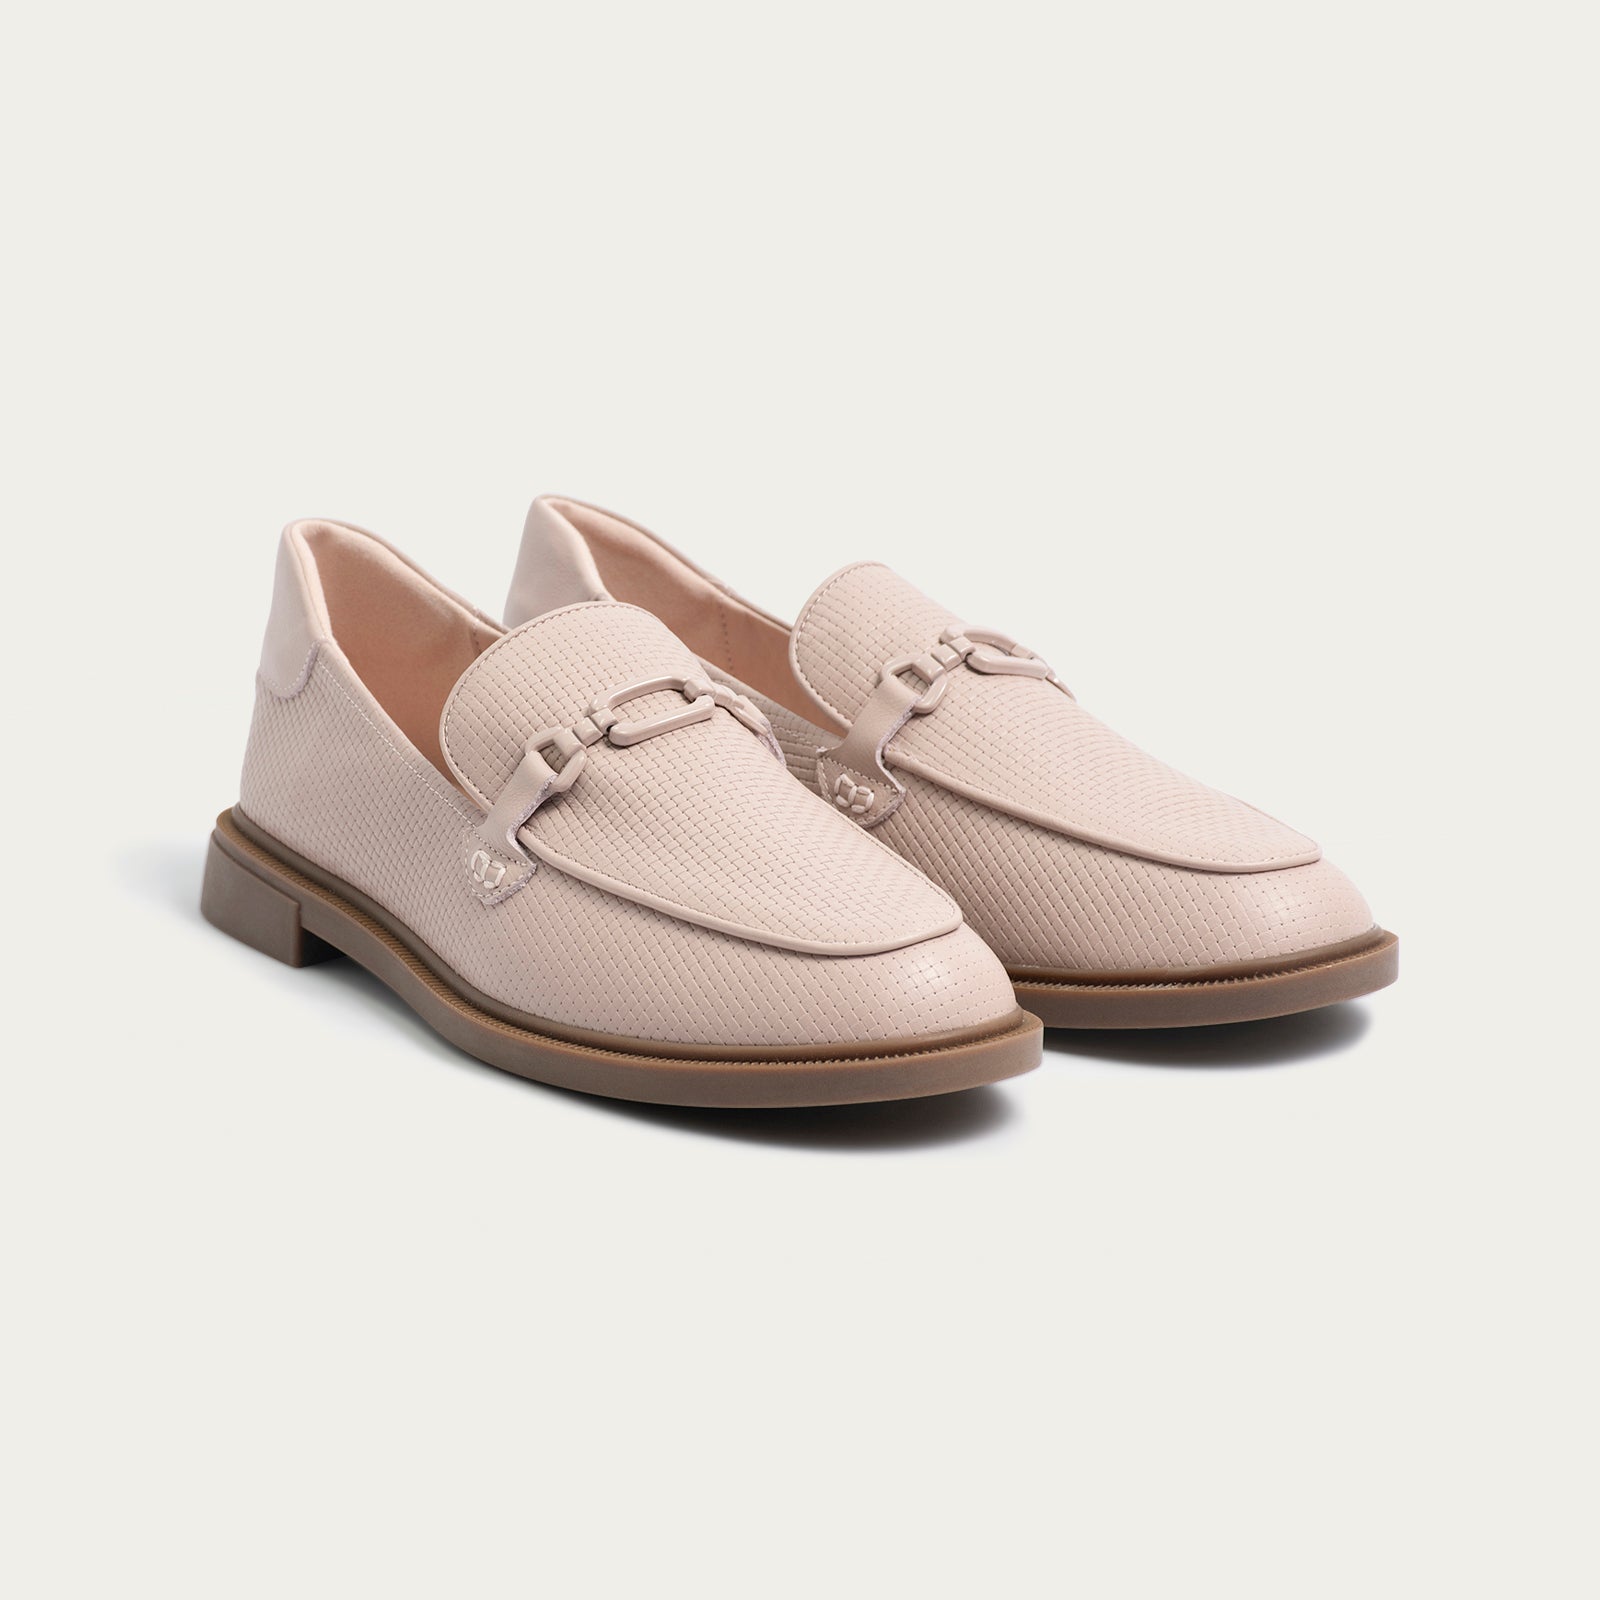 Noreen Loafers